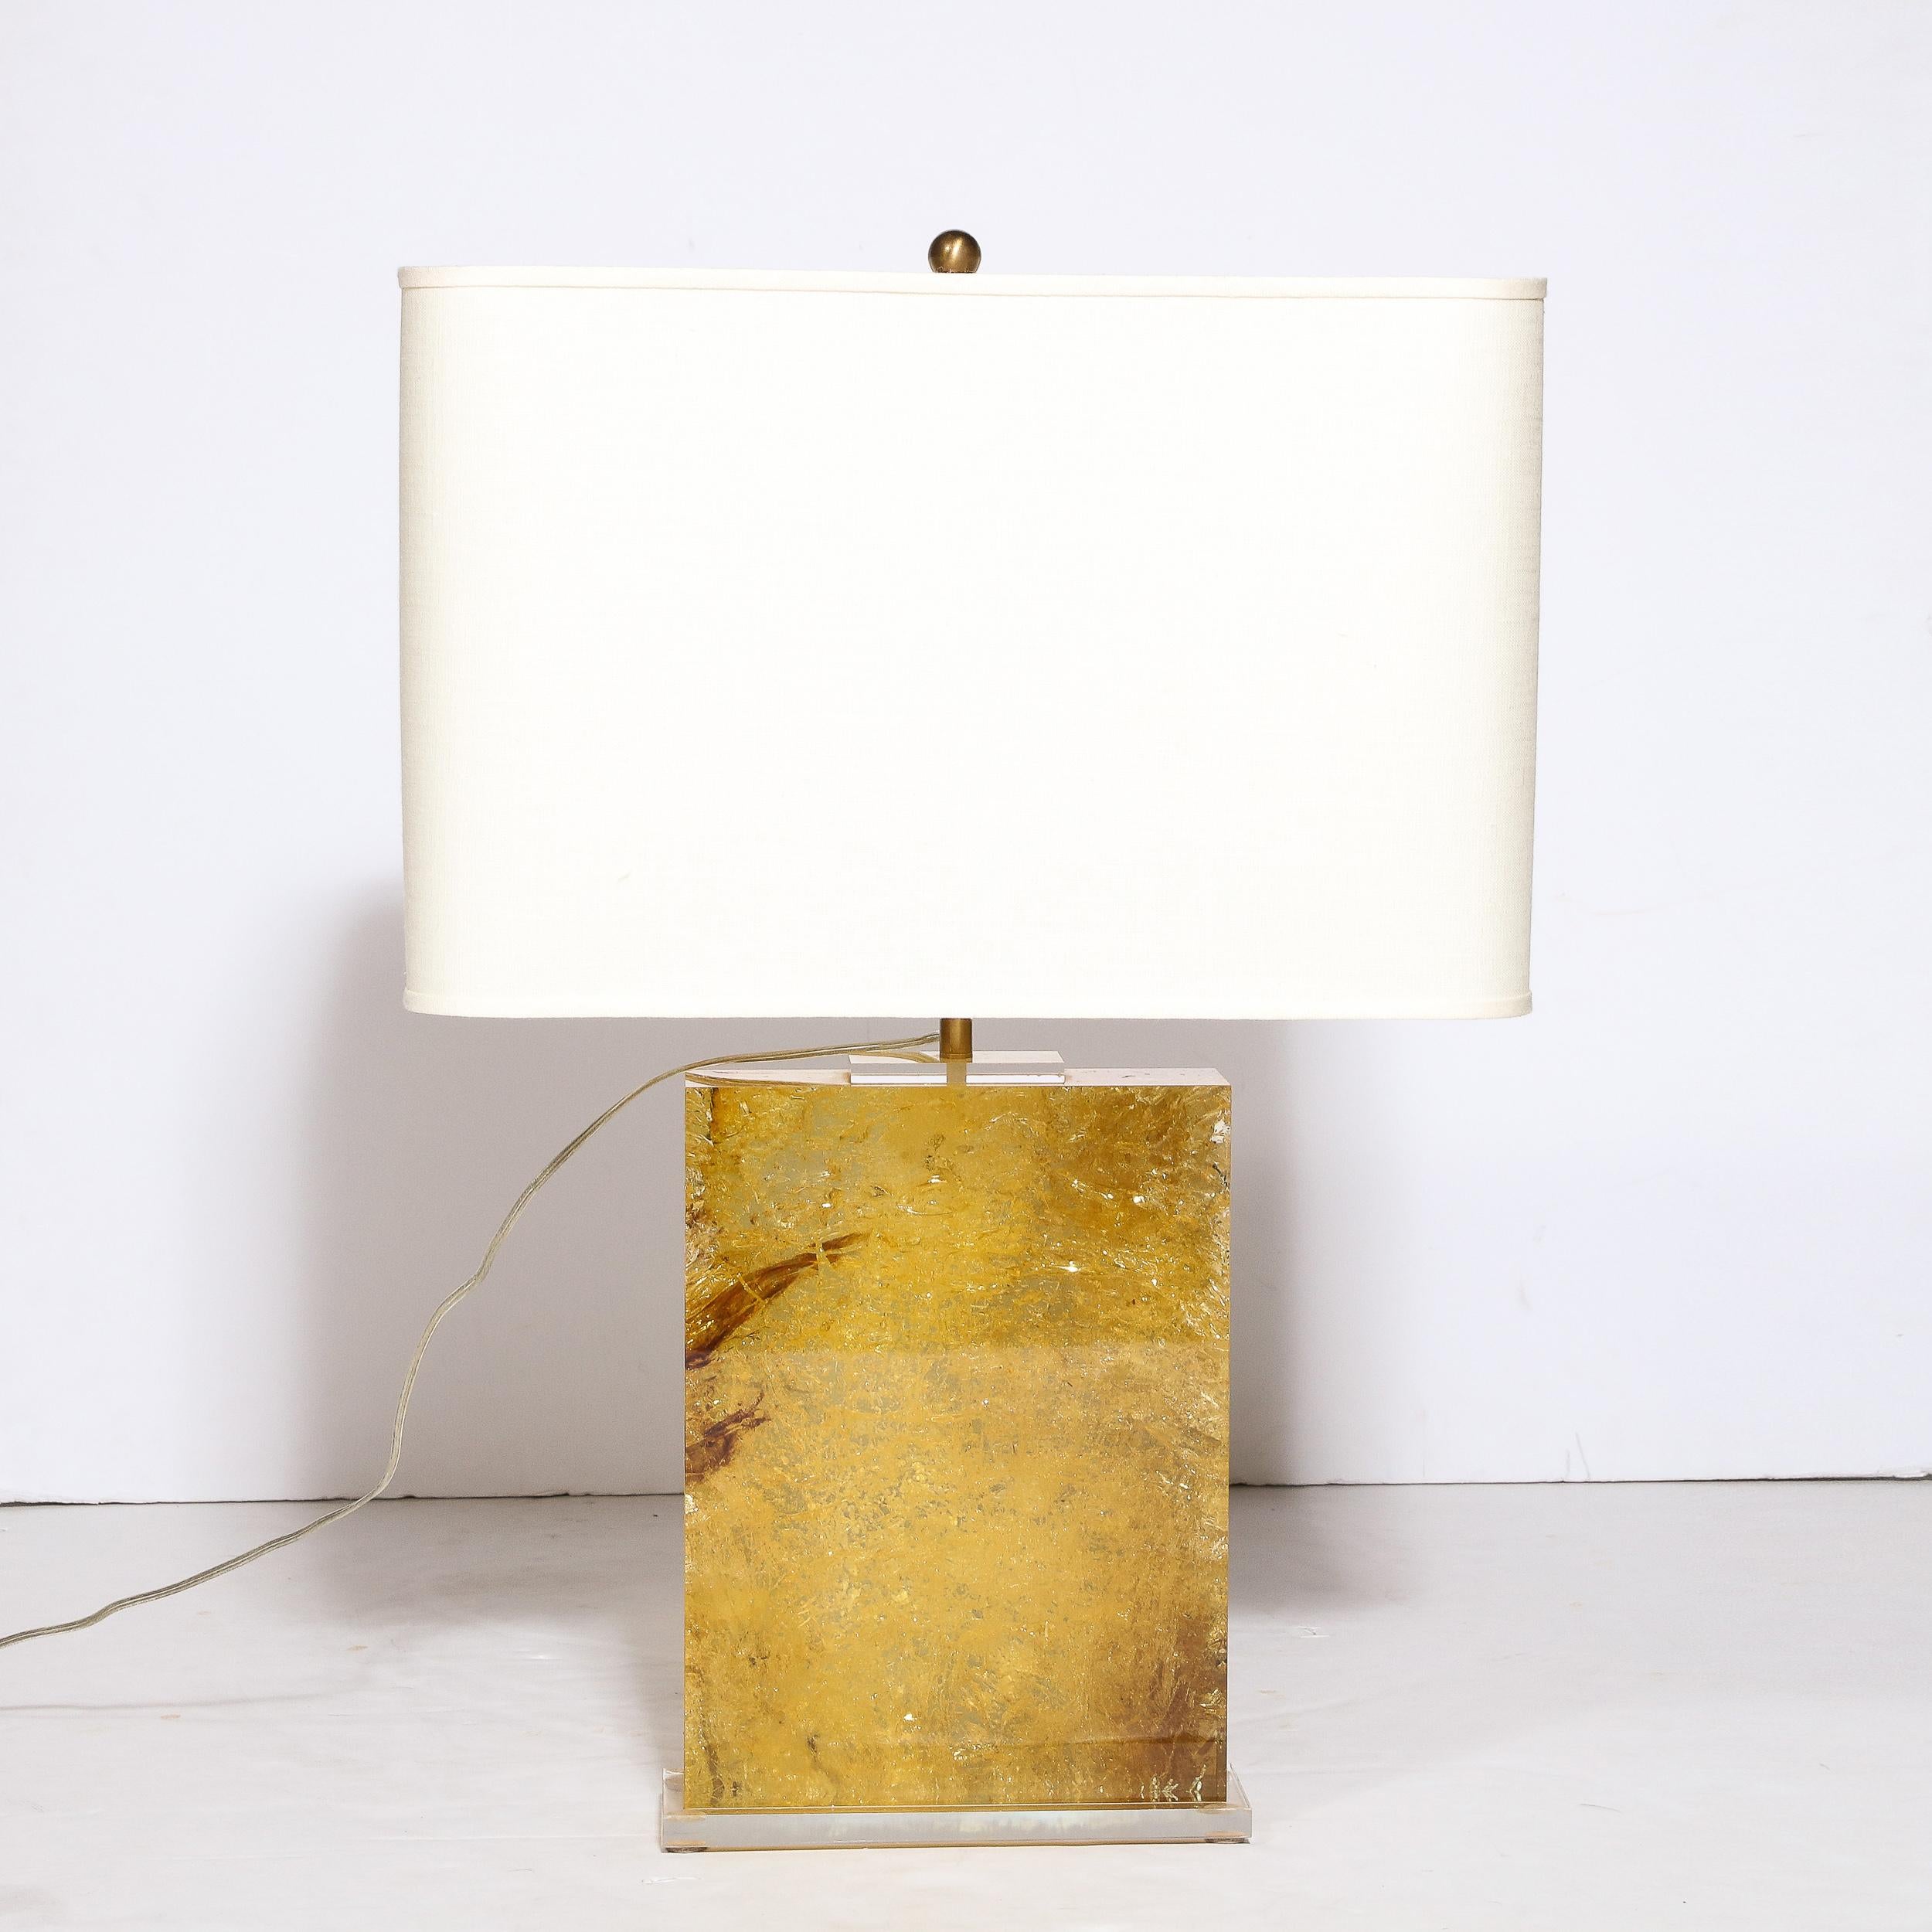 This beautiful modernist pressed lucite table lamp was realized in the United States during the latter half of the 20th century. It features a volumetric rectangular form with an interior full of textural and sumptuous tonalities of gold and amber,